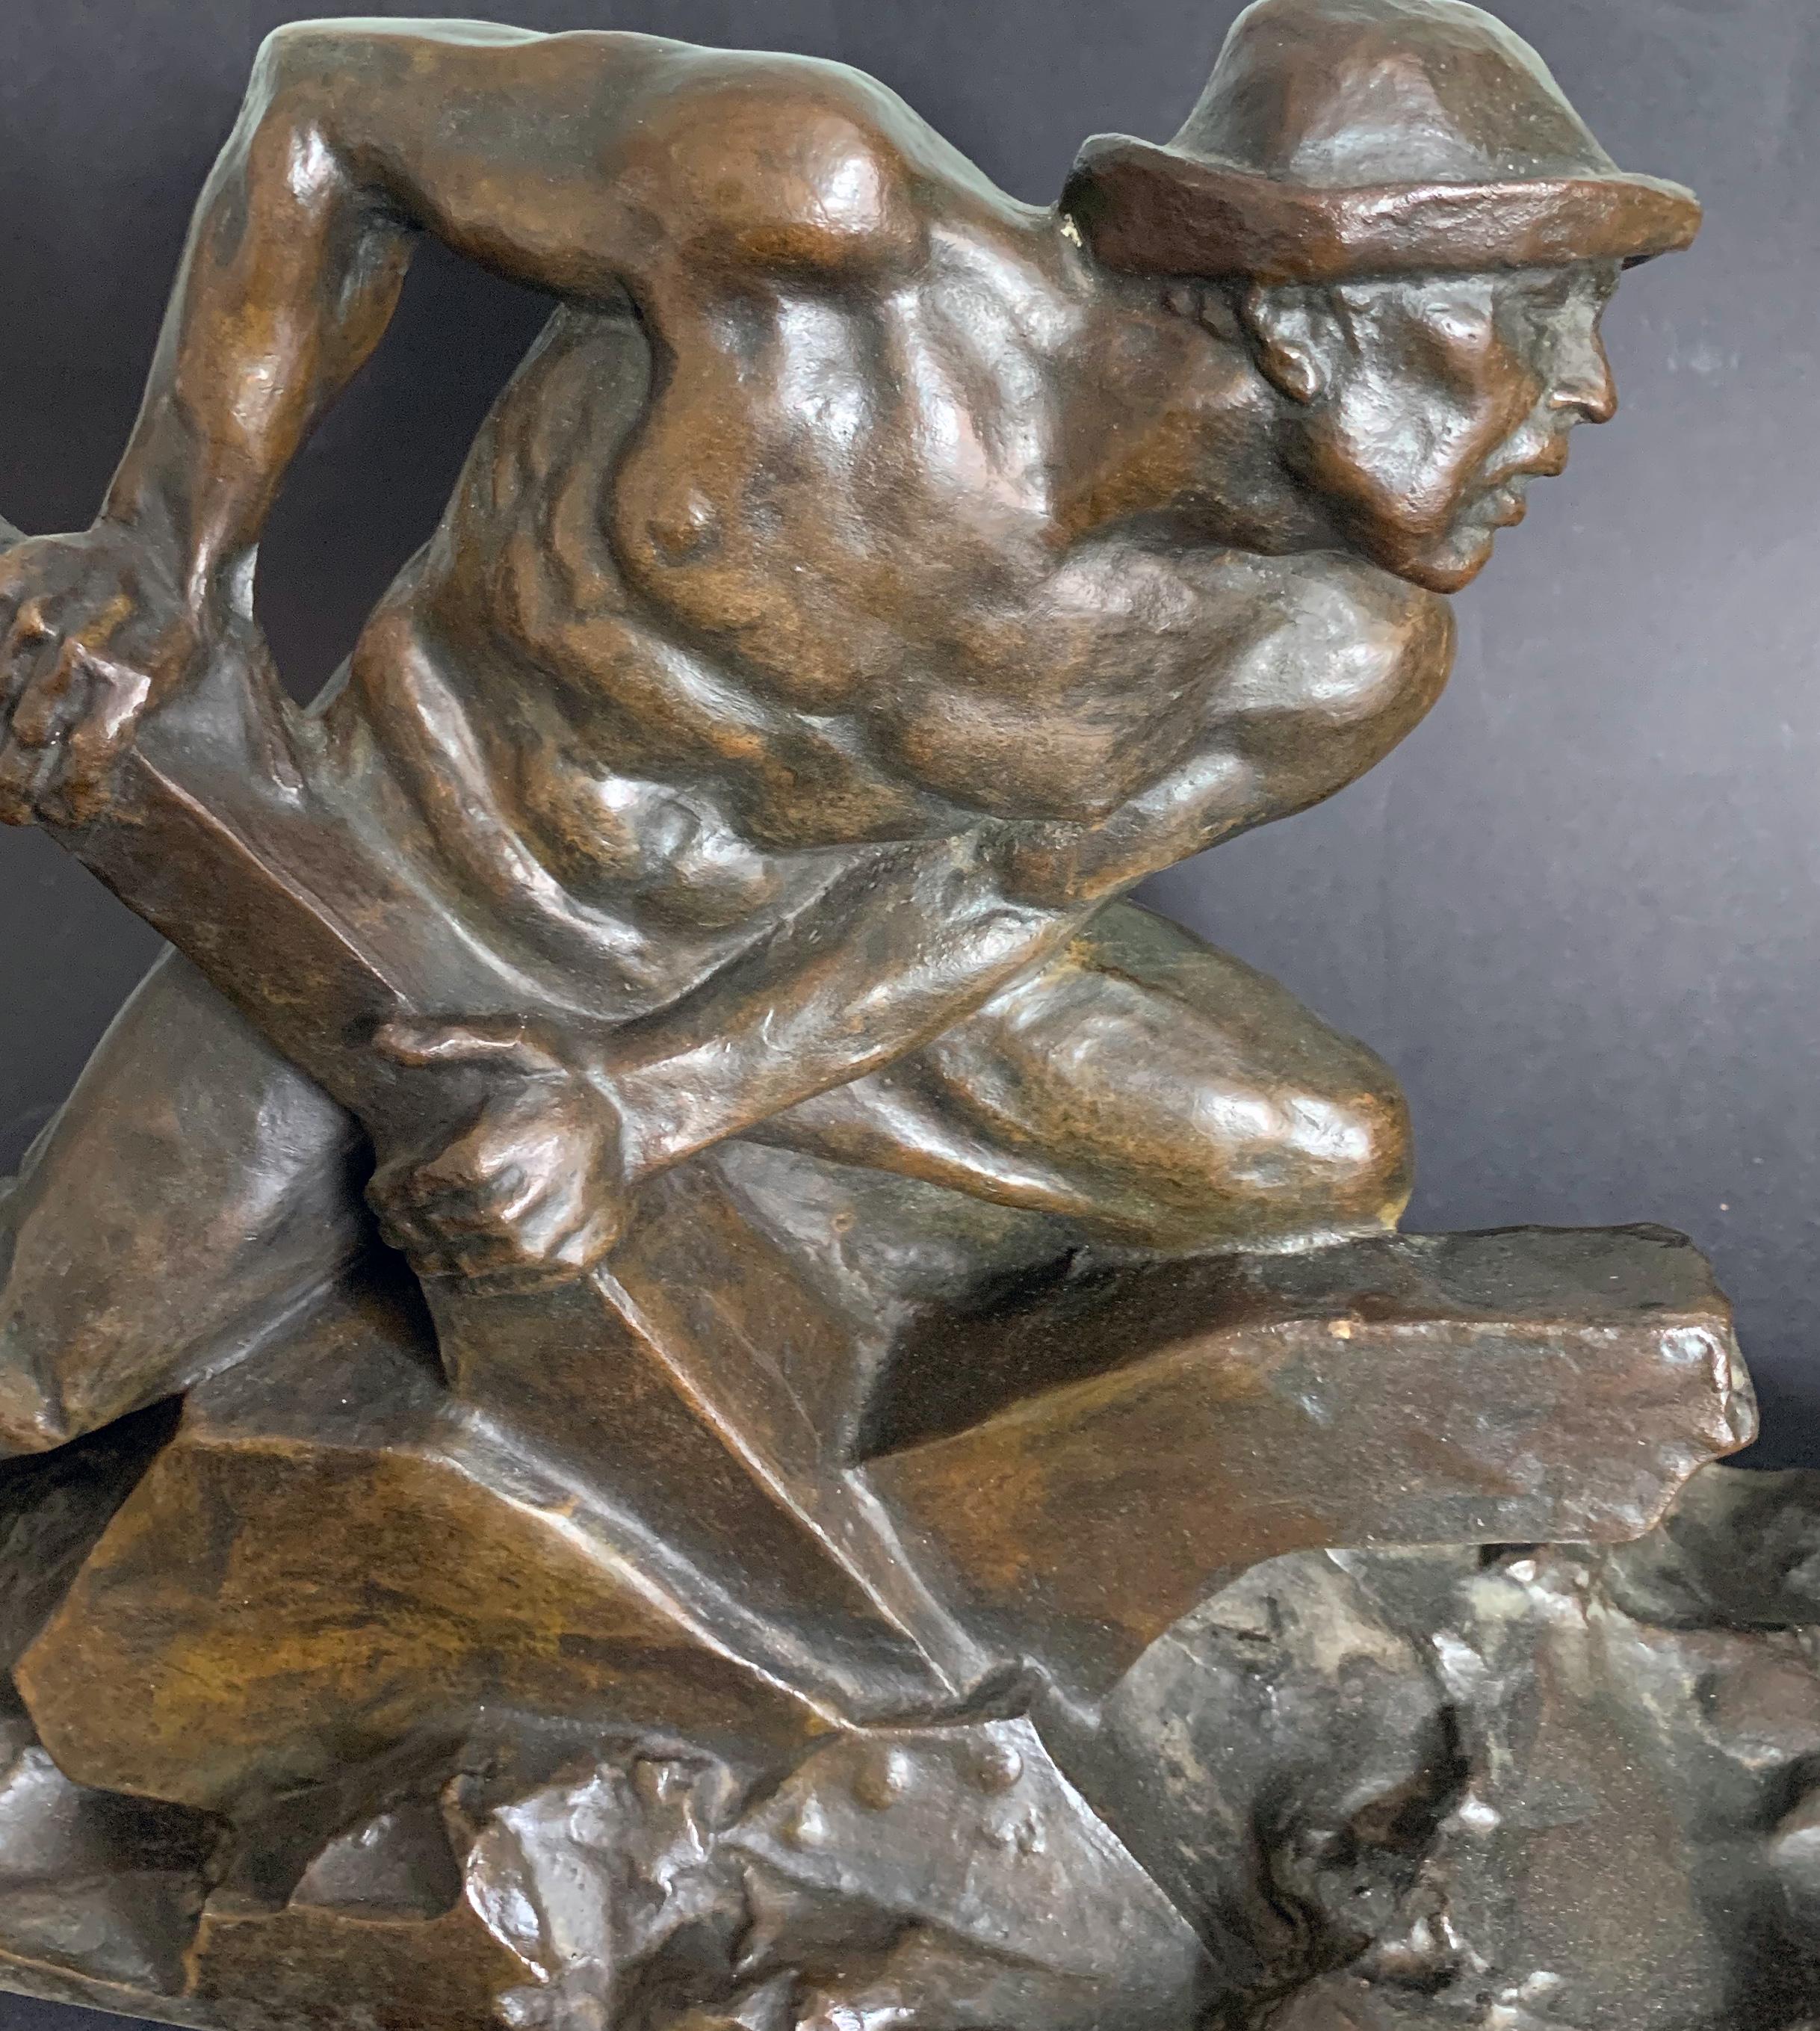 Large and rare, this bronze sculpture depicting a half-nude laborer in the field, straining to move his plow through the soil, was sculpted by Jeanne Bertrand, an important French-American artist whose works are scarce and important. Many sculptors